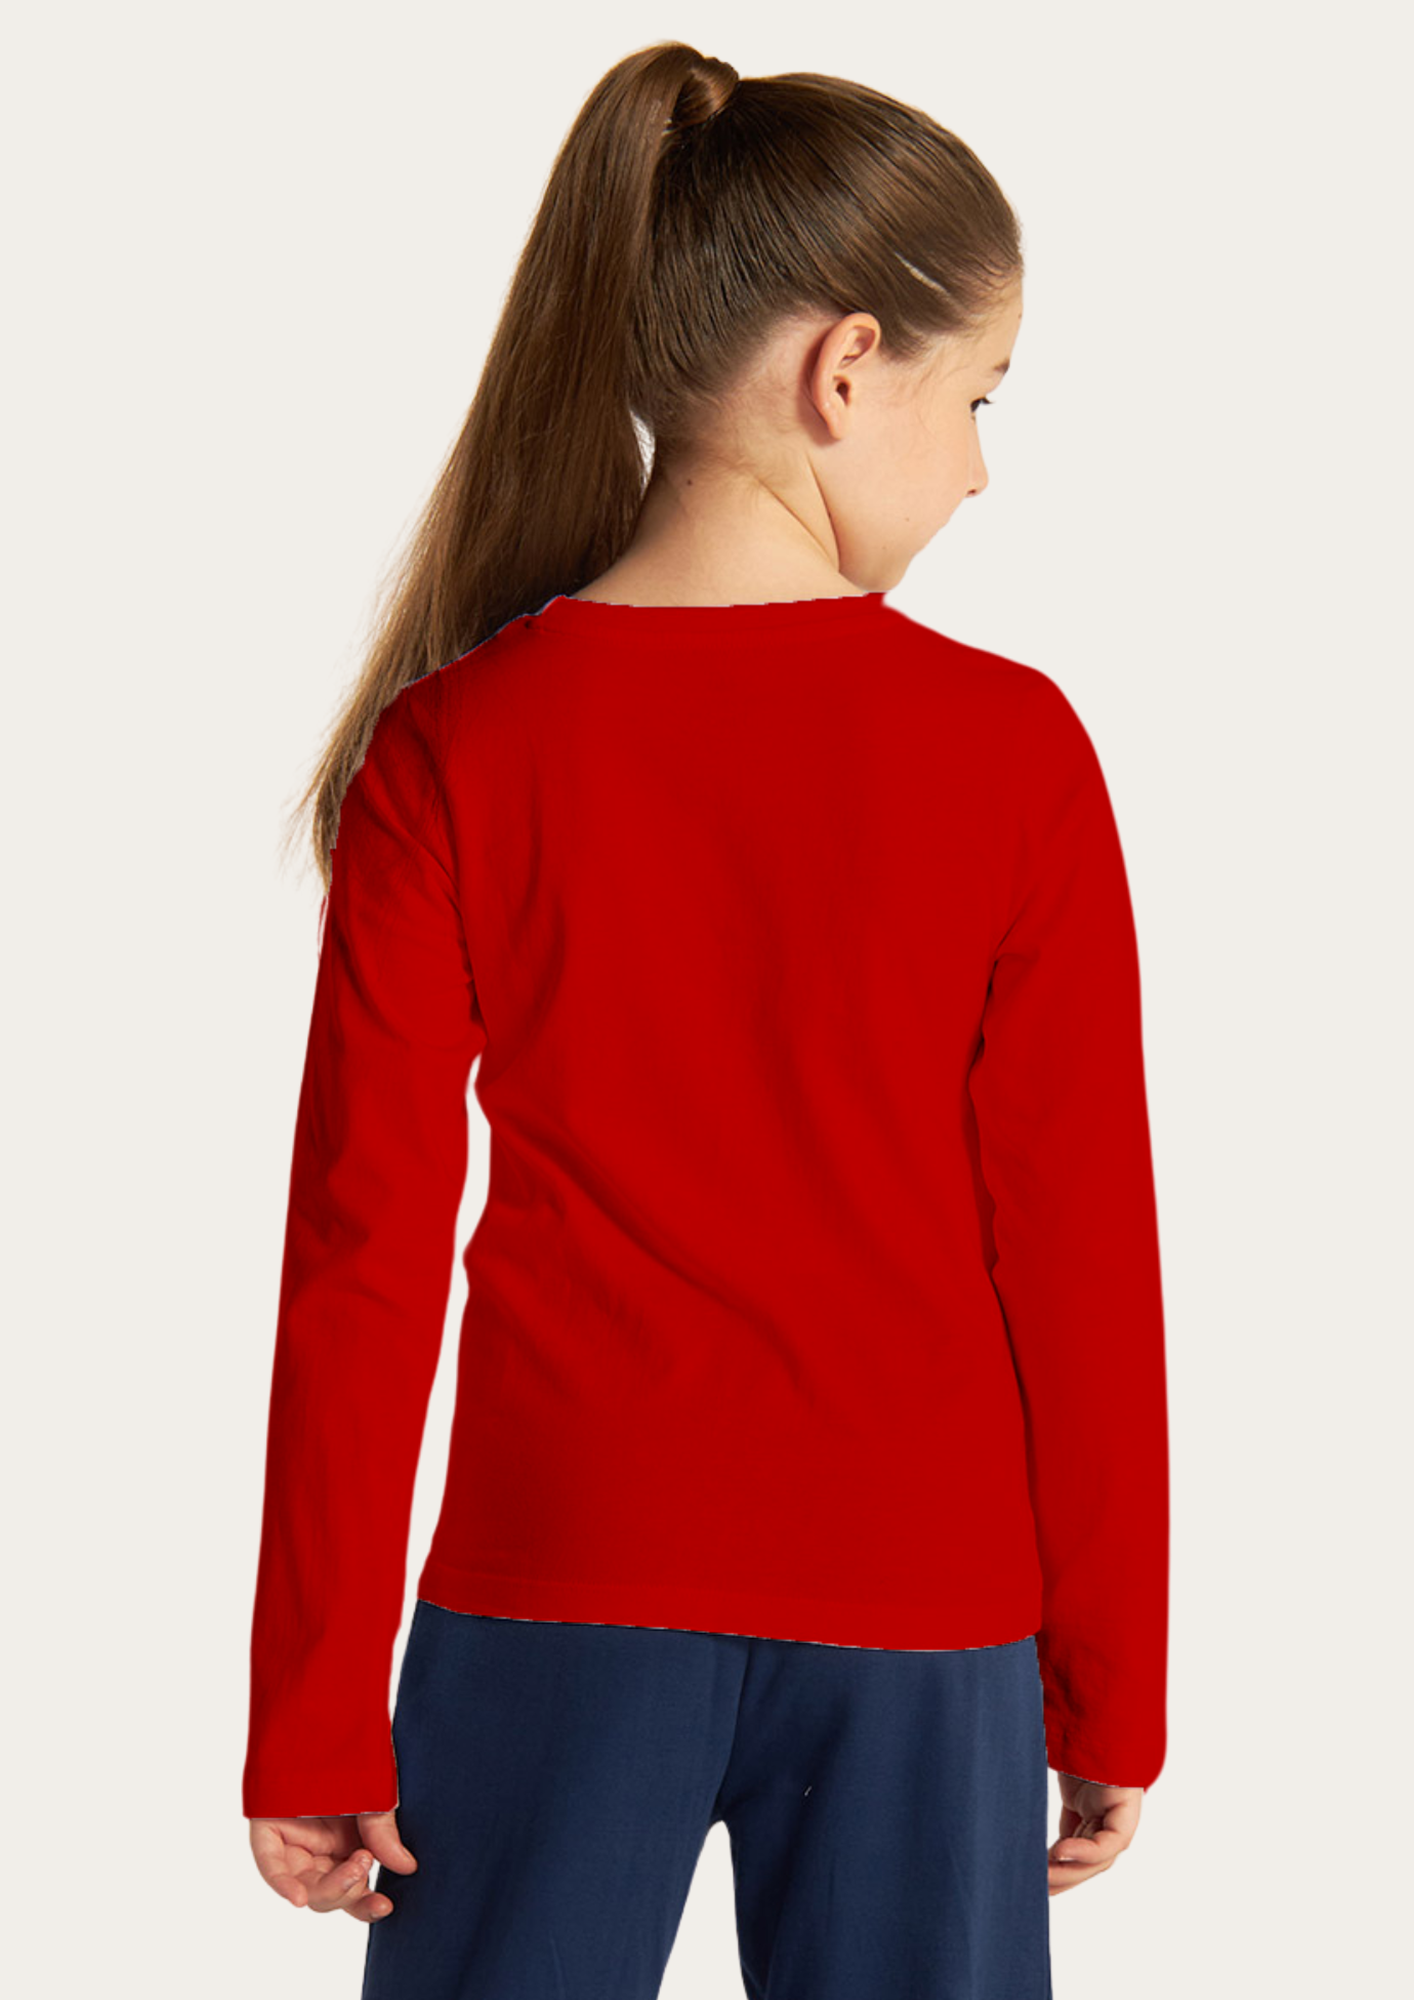 Bloom Printed Red Full Sleeves Kids T-shirt By Offmint